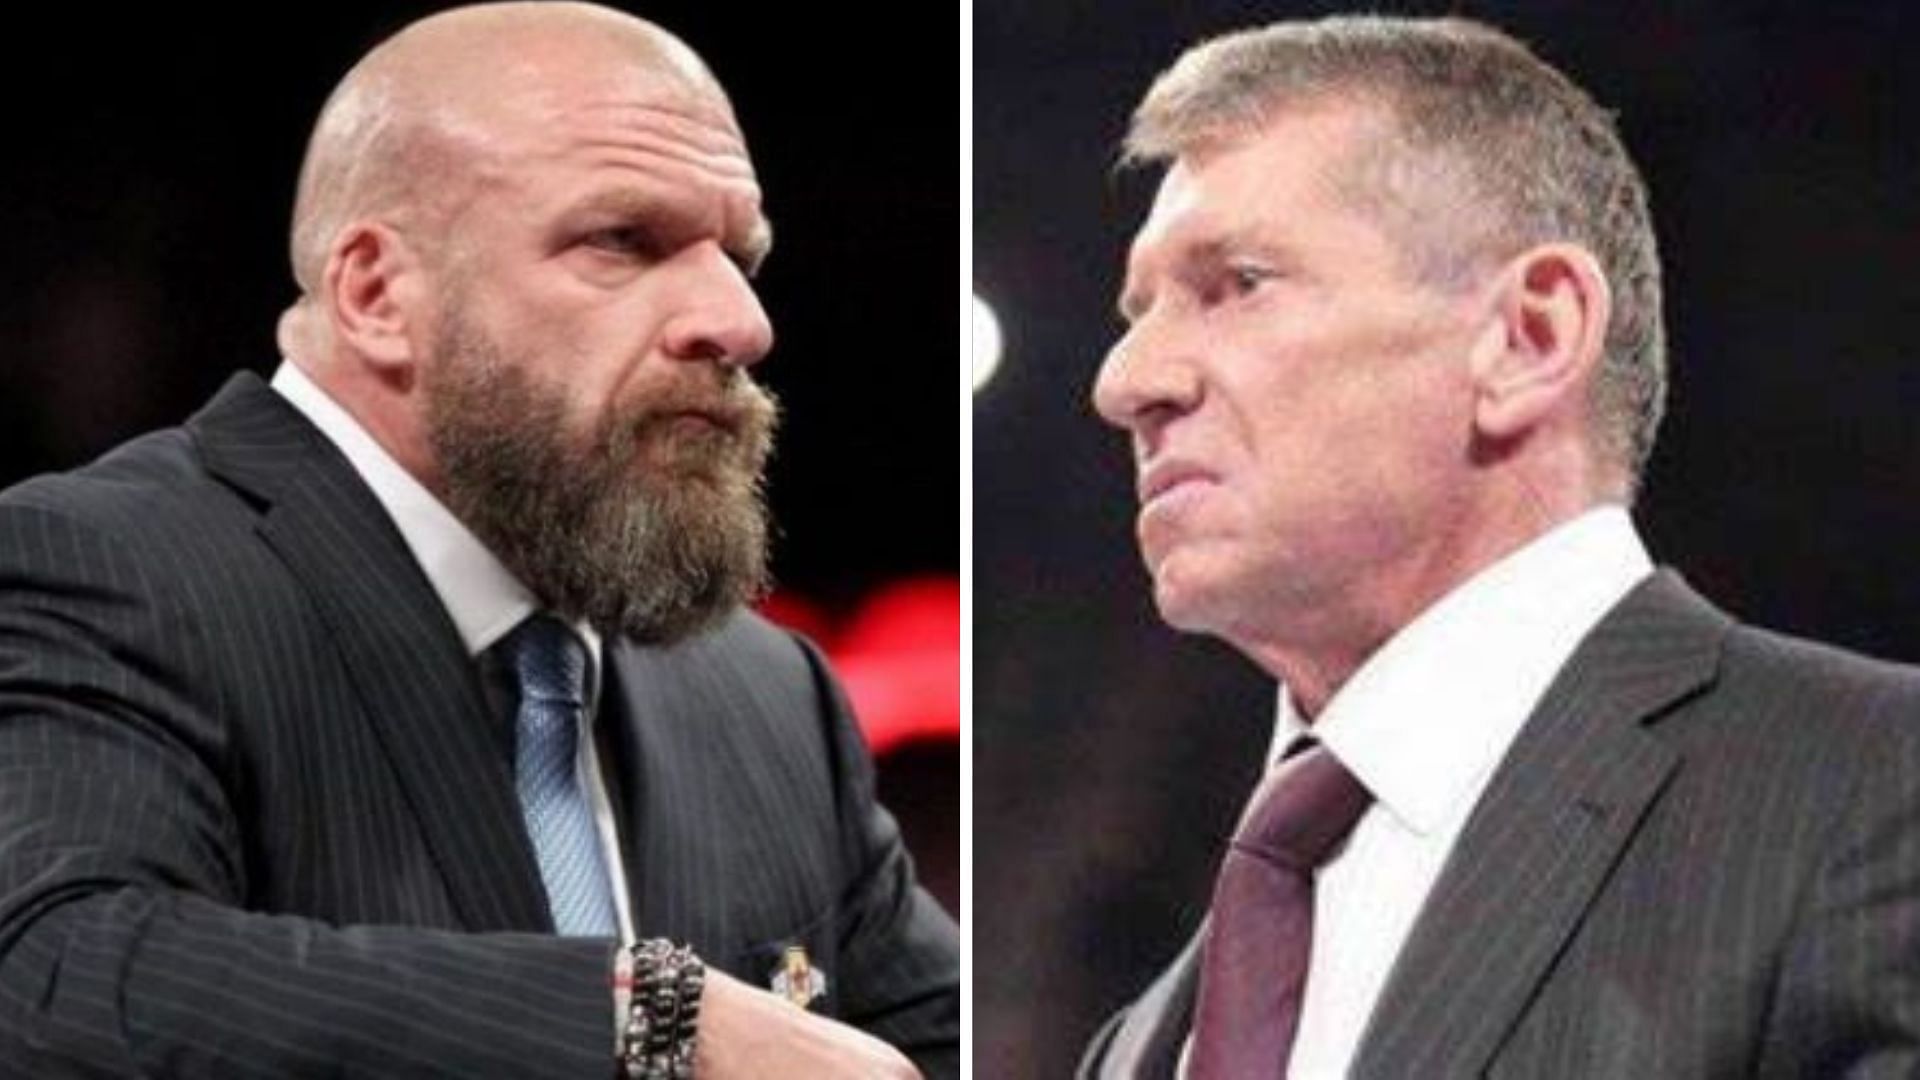 Triple H on the left, Vince McMahon on the right